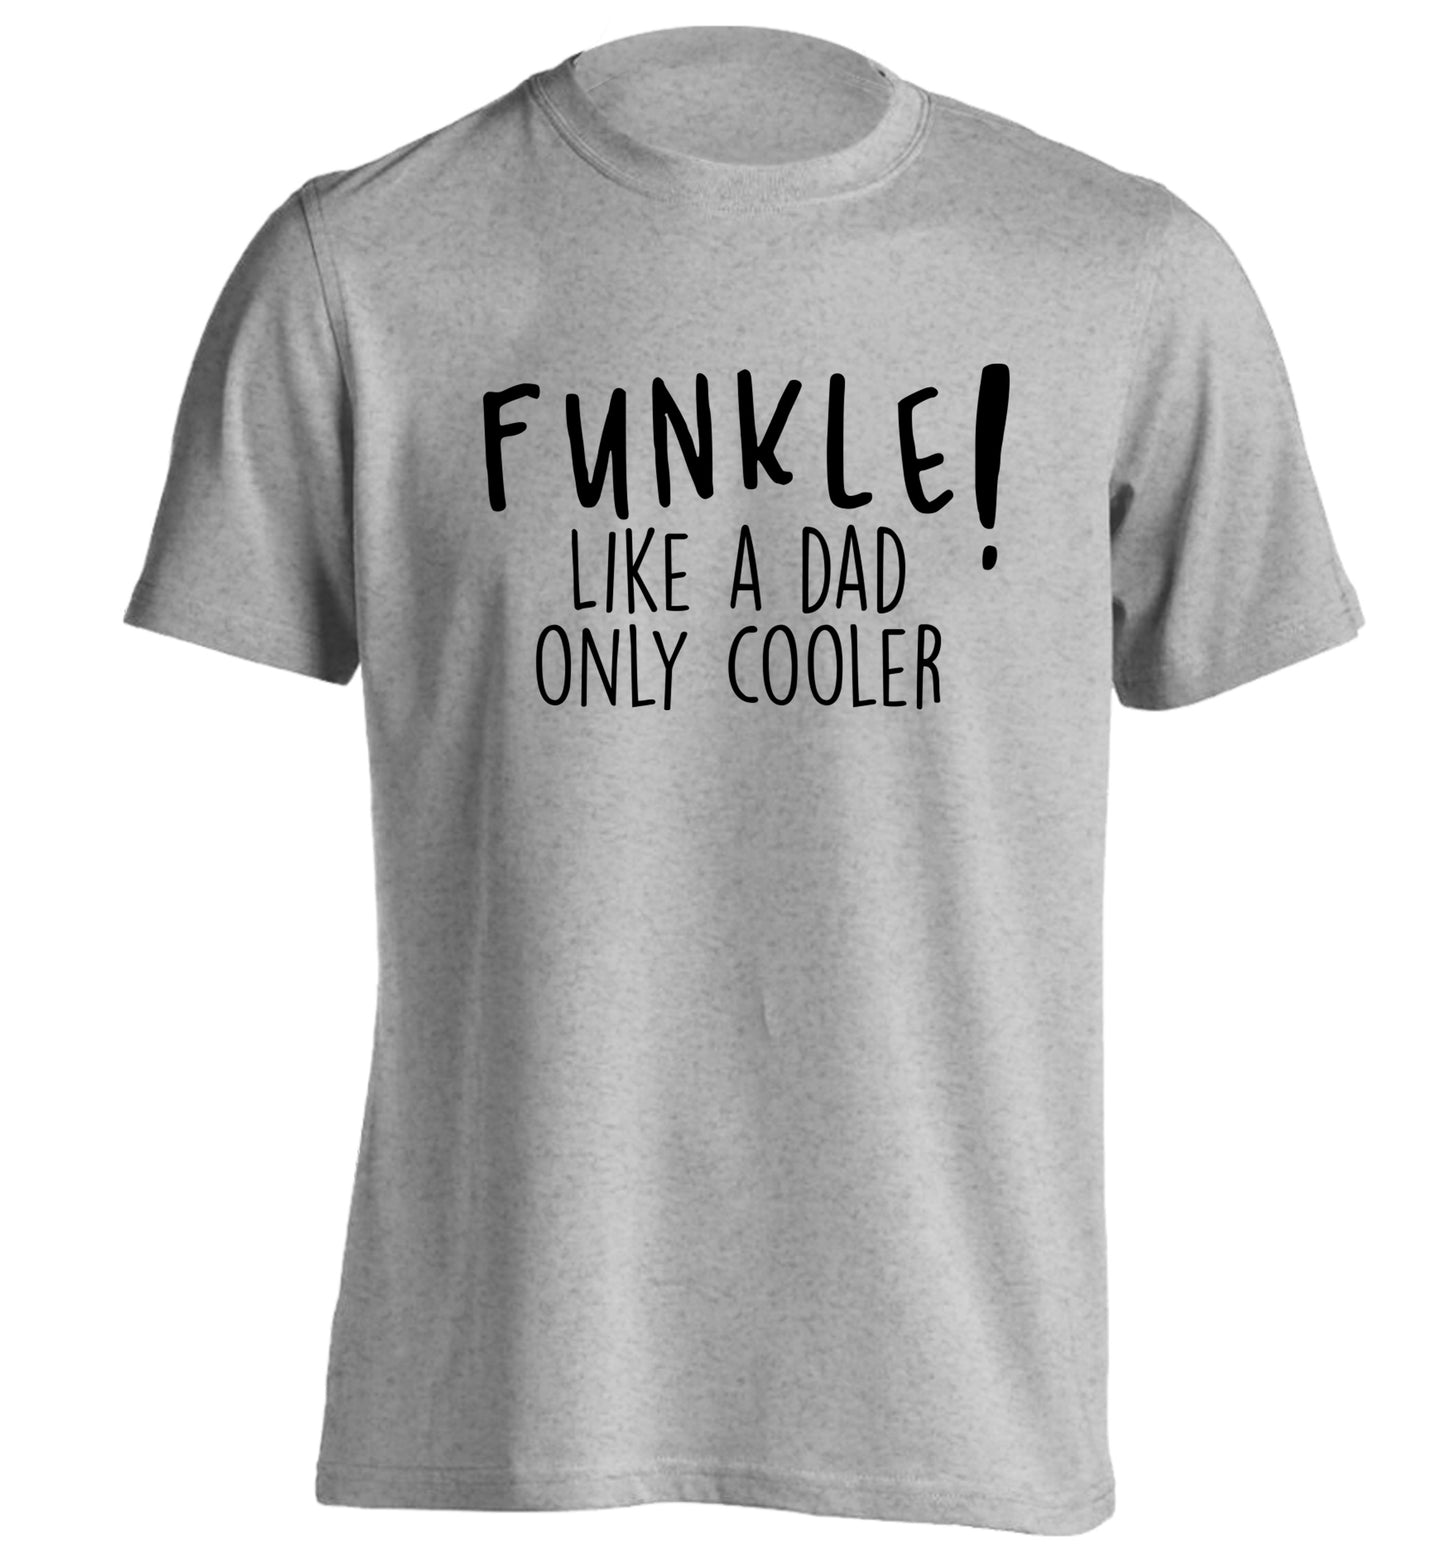 Funkle Like a Dad Only Cooler adults unisex grey Tshirt 2XL